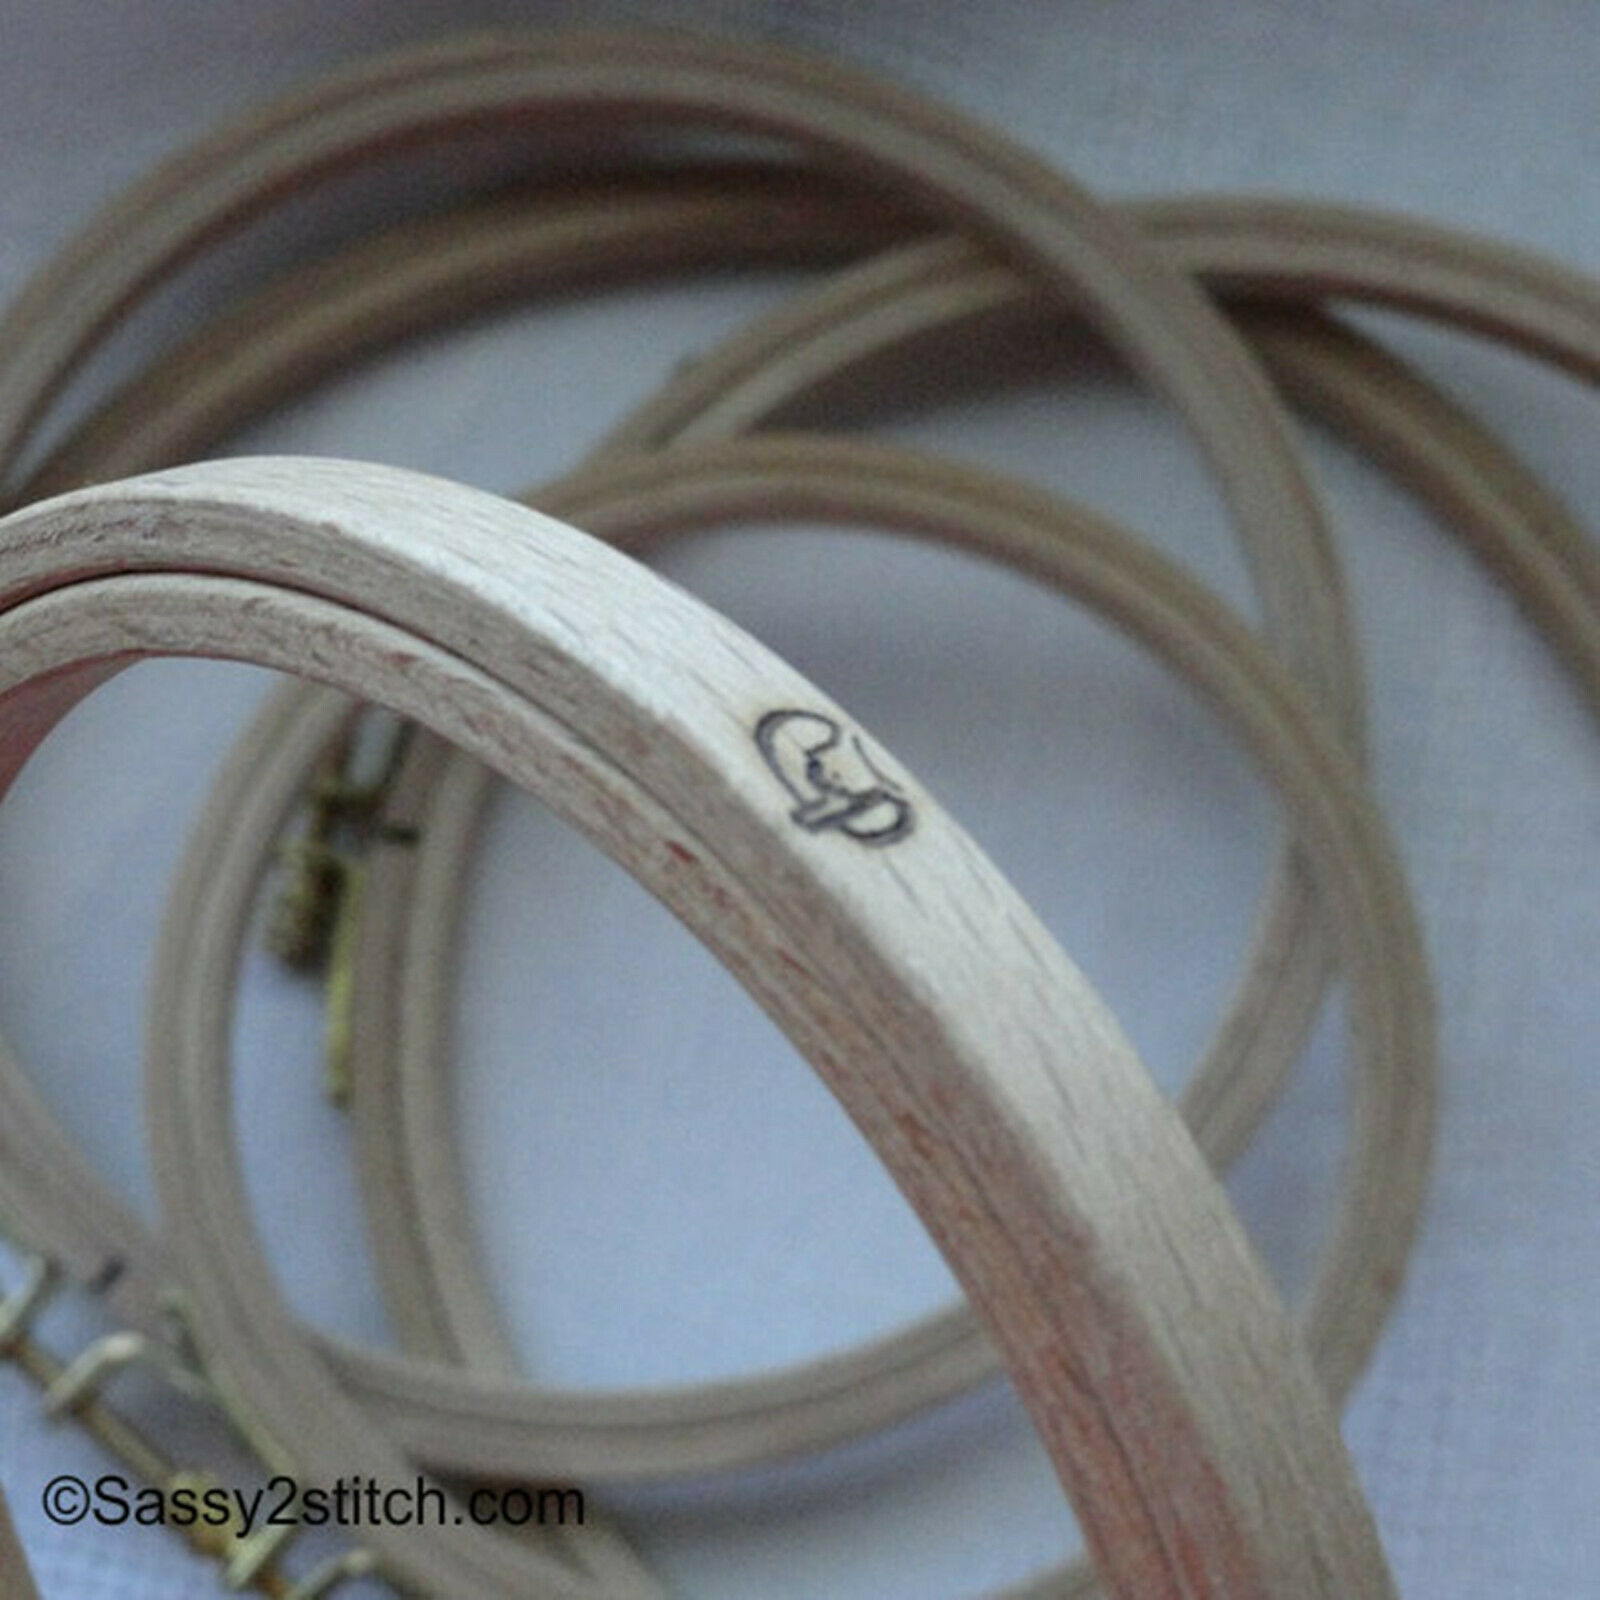 Klass & Gessmann Embroidery Hoops - Hand Or Machine - Assorted Sizes